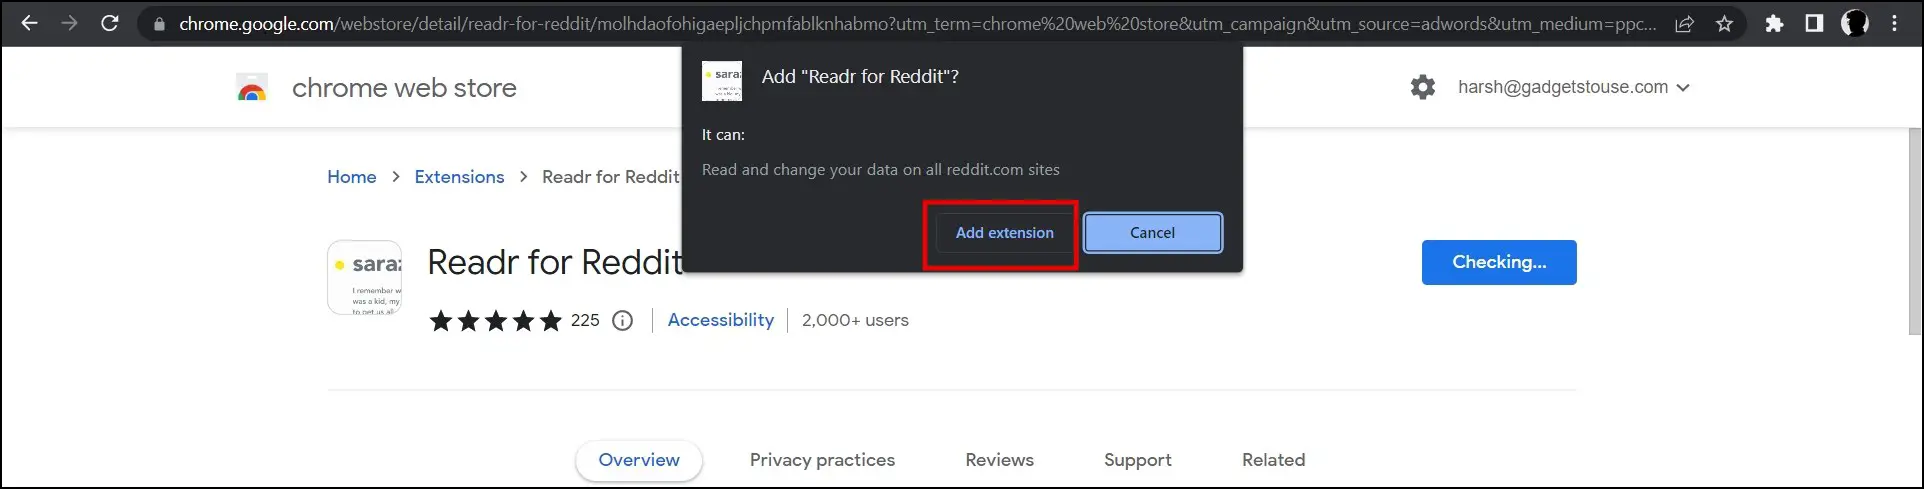 Add Chrome Extension